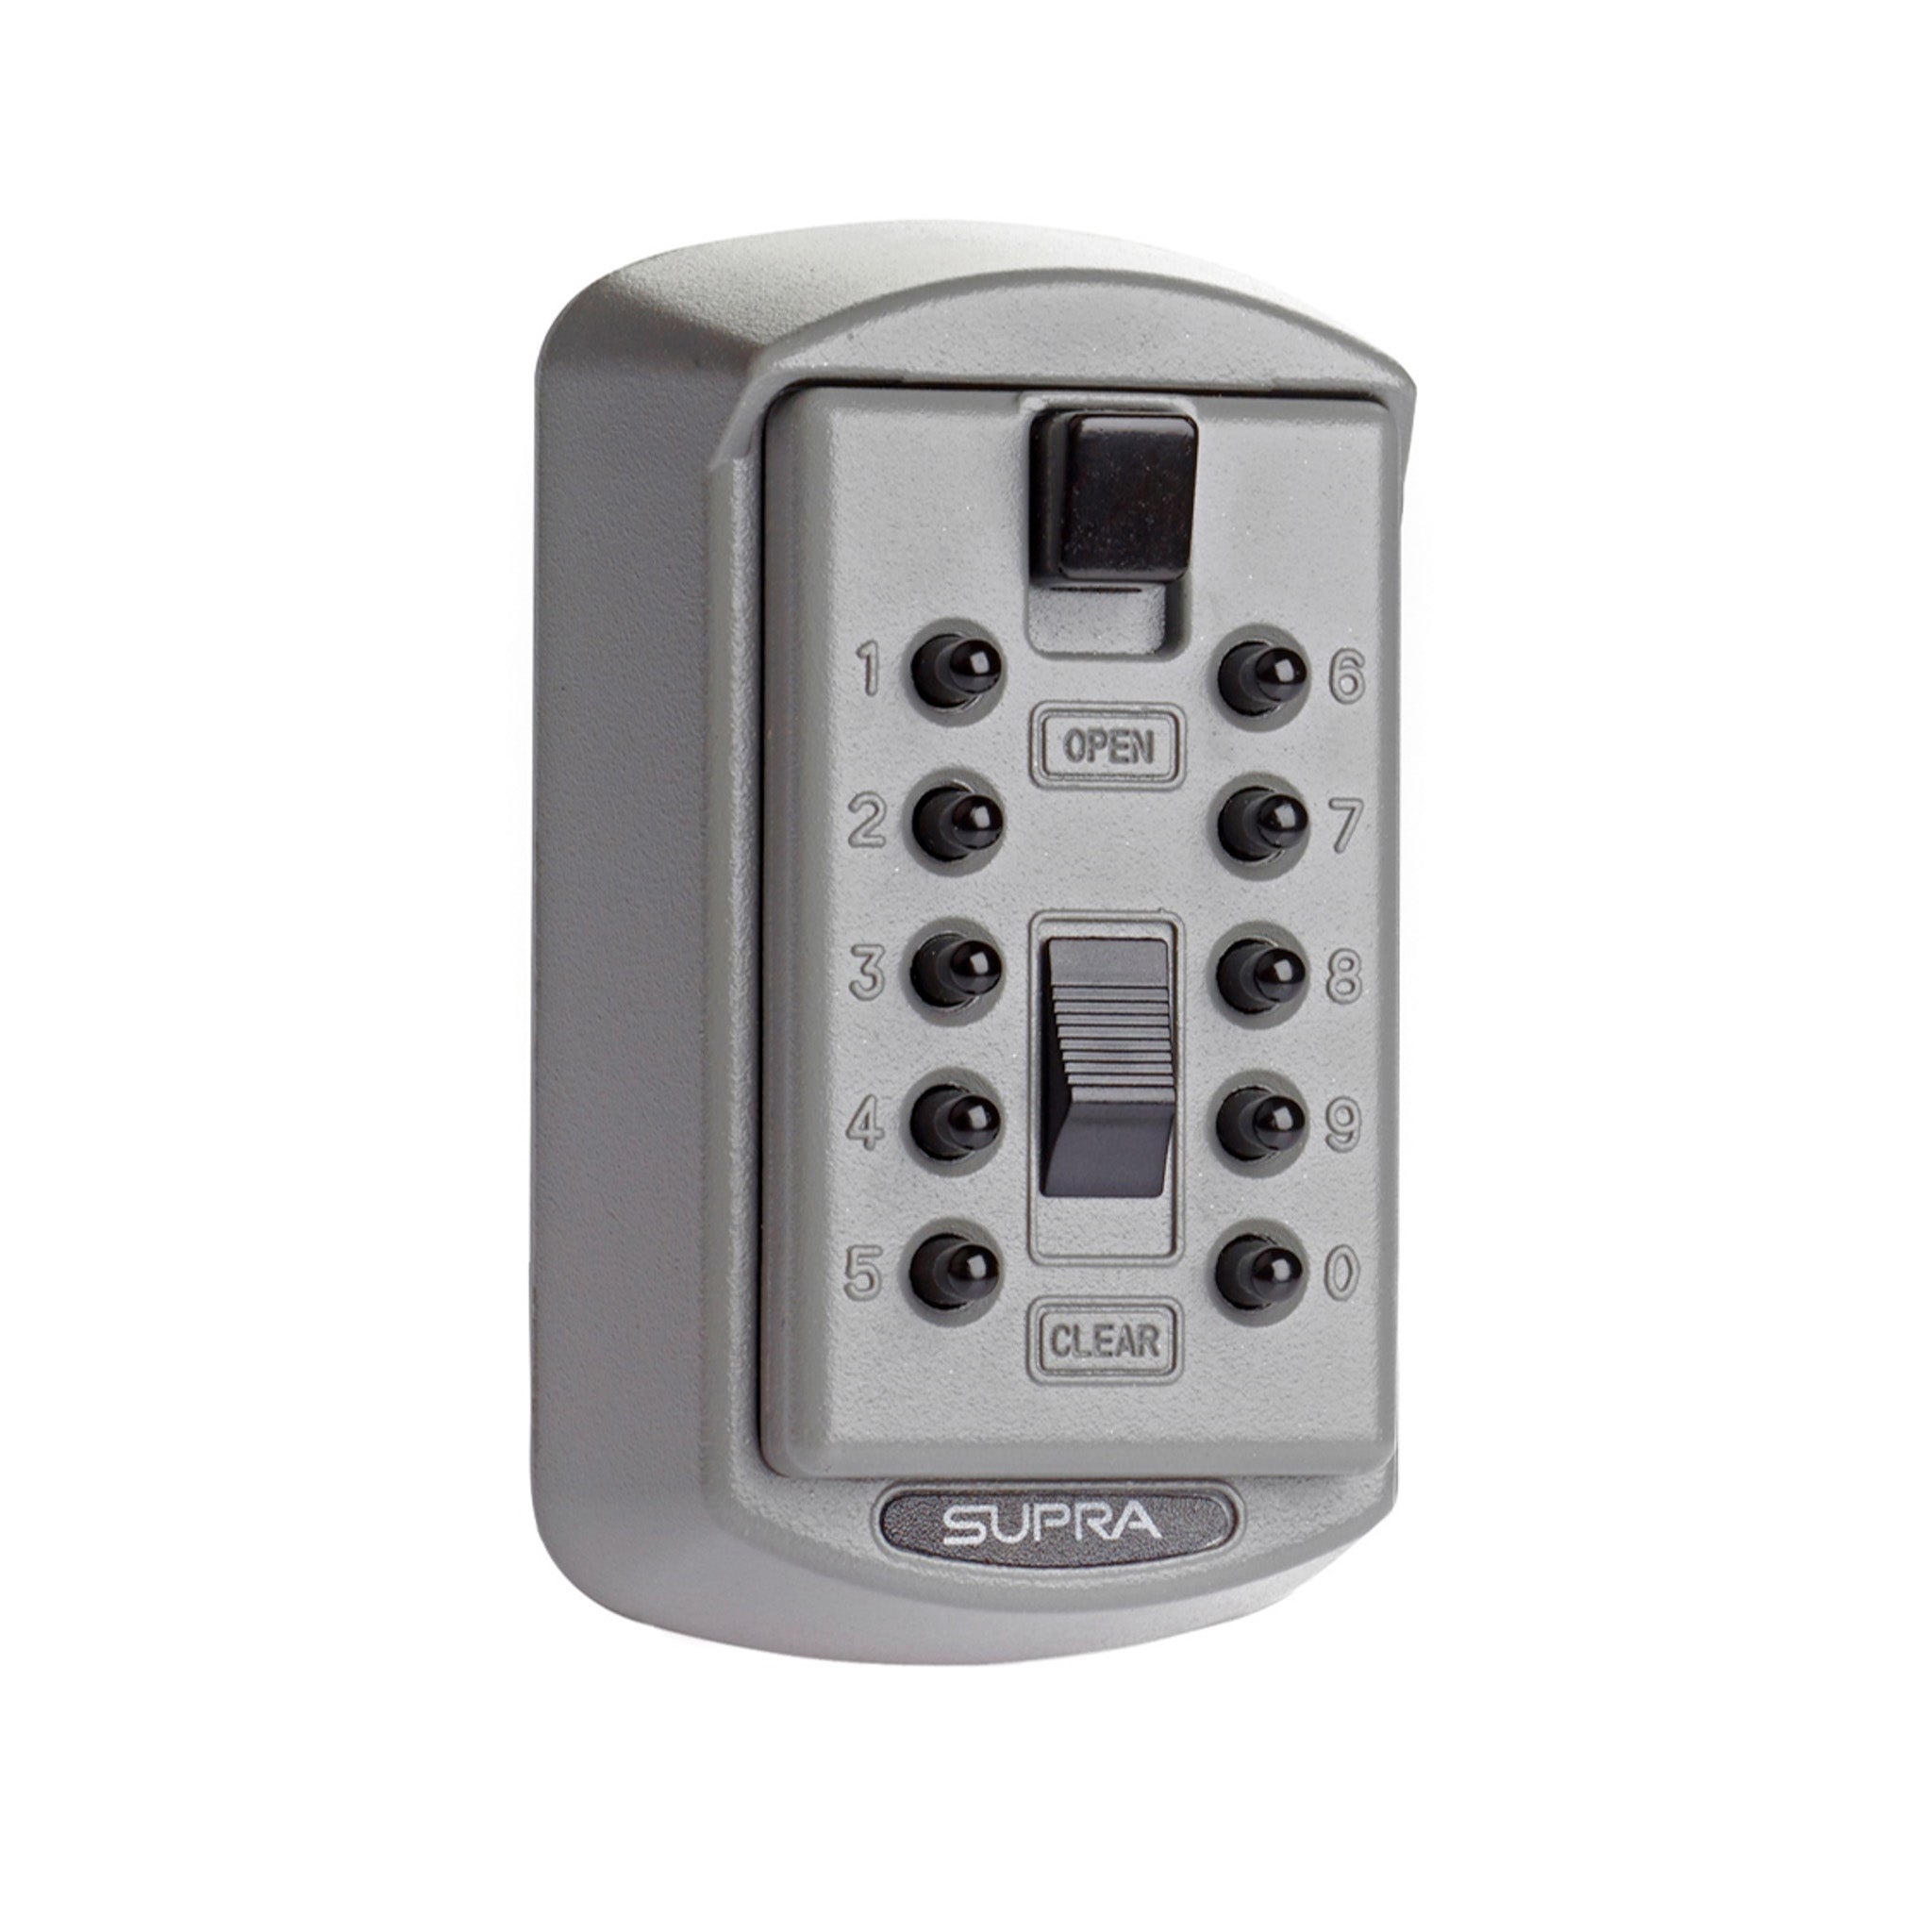 Closed Supra S6 plant and machinery key safe for automotive made from zinc alloy 